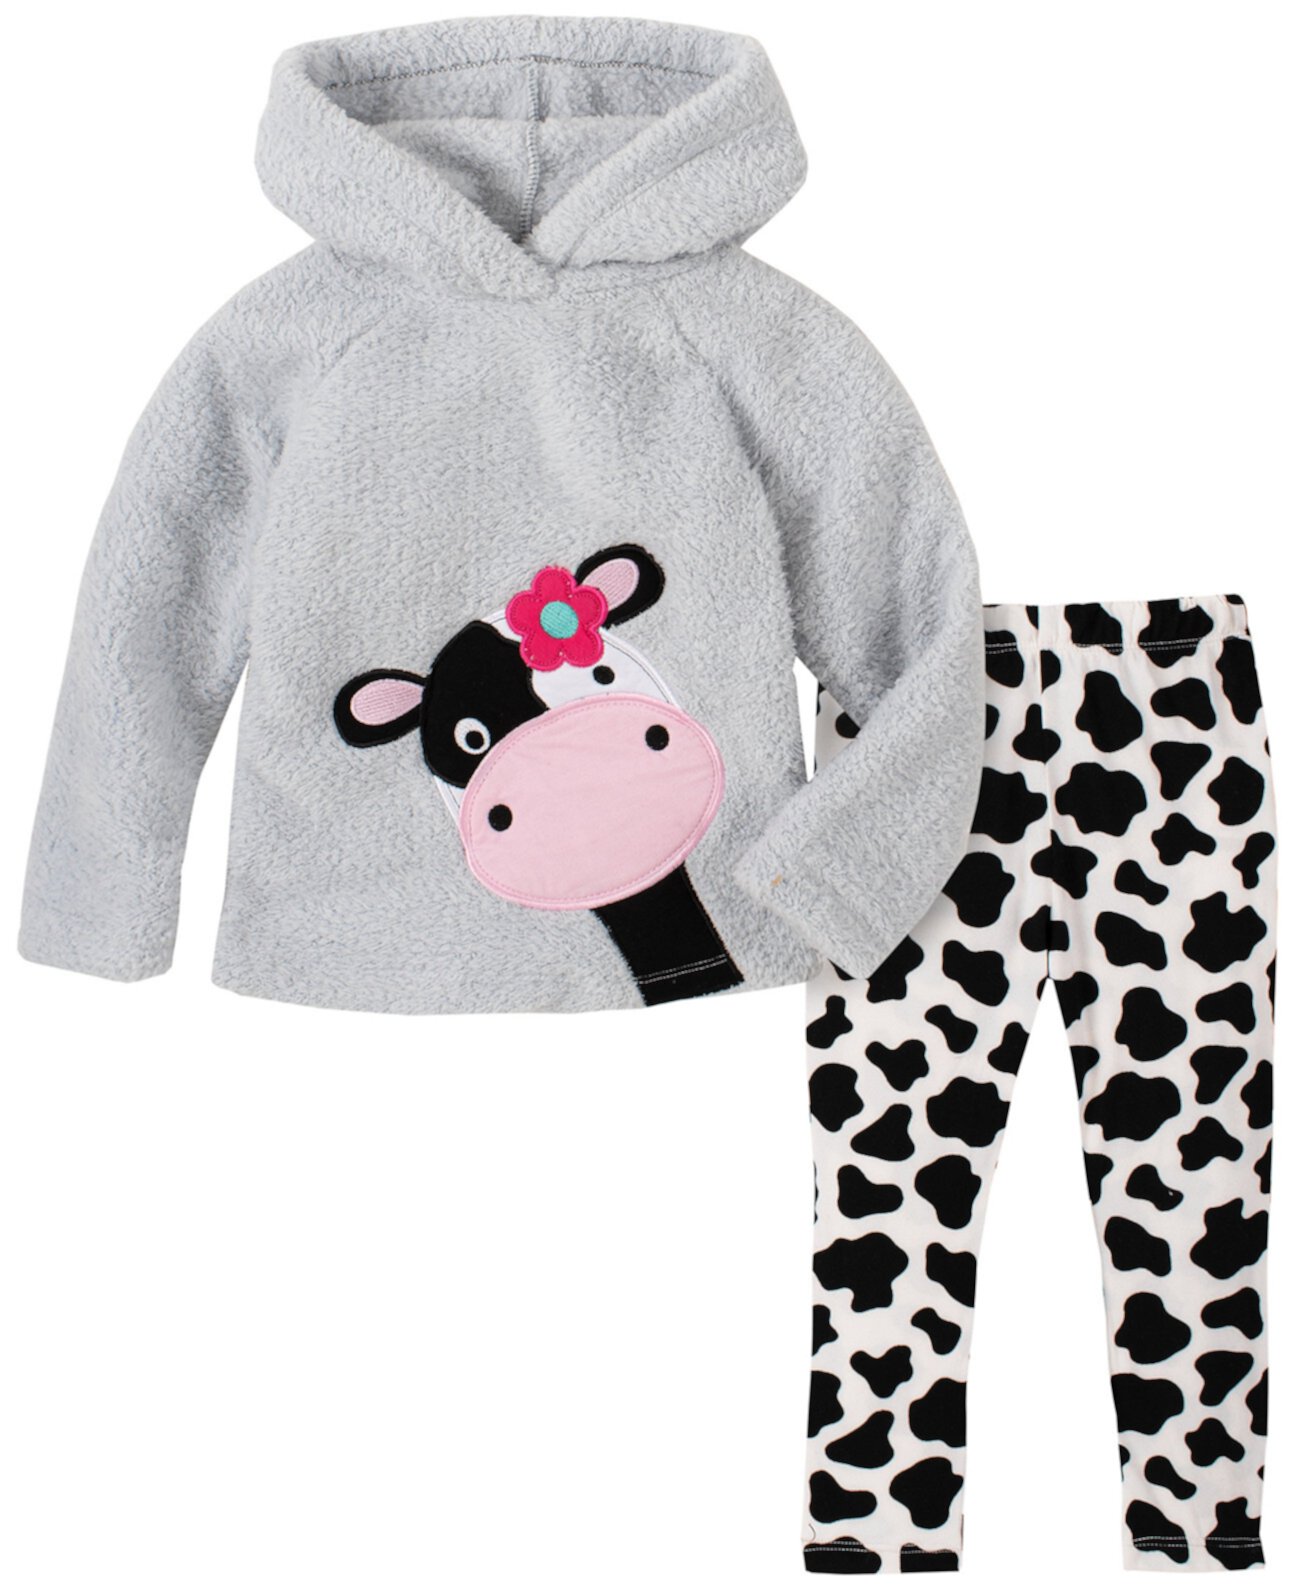 Toddler Girl 2-Piece Hooded Fleece Top with Cow Print Legging Set Kids Headquarters